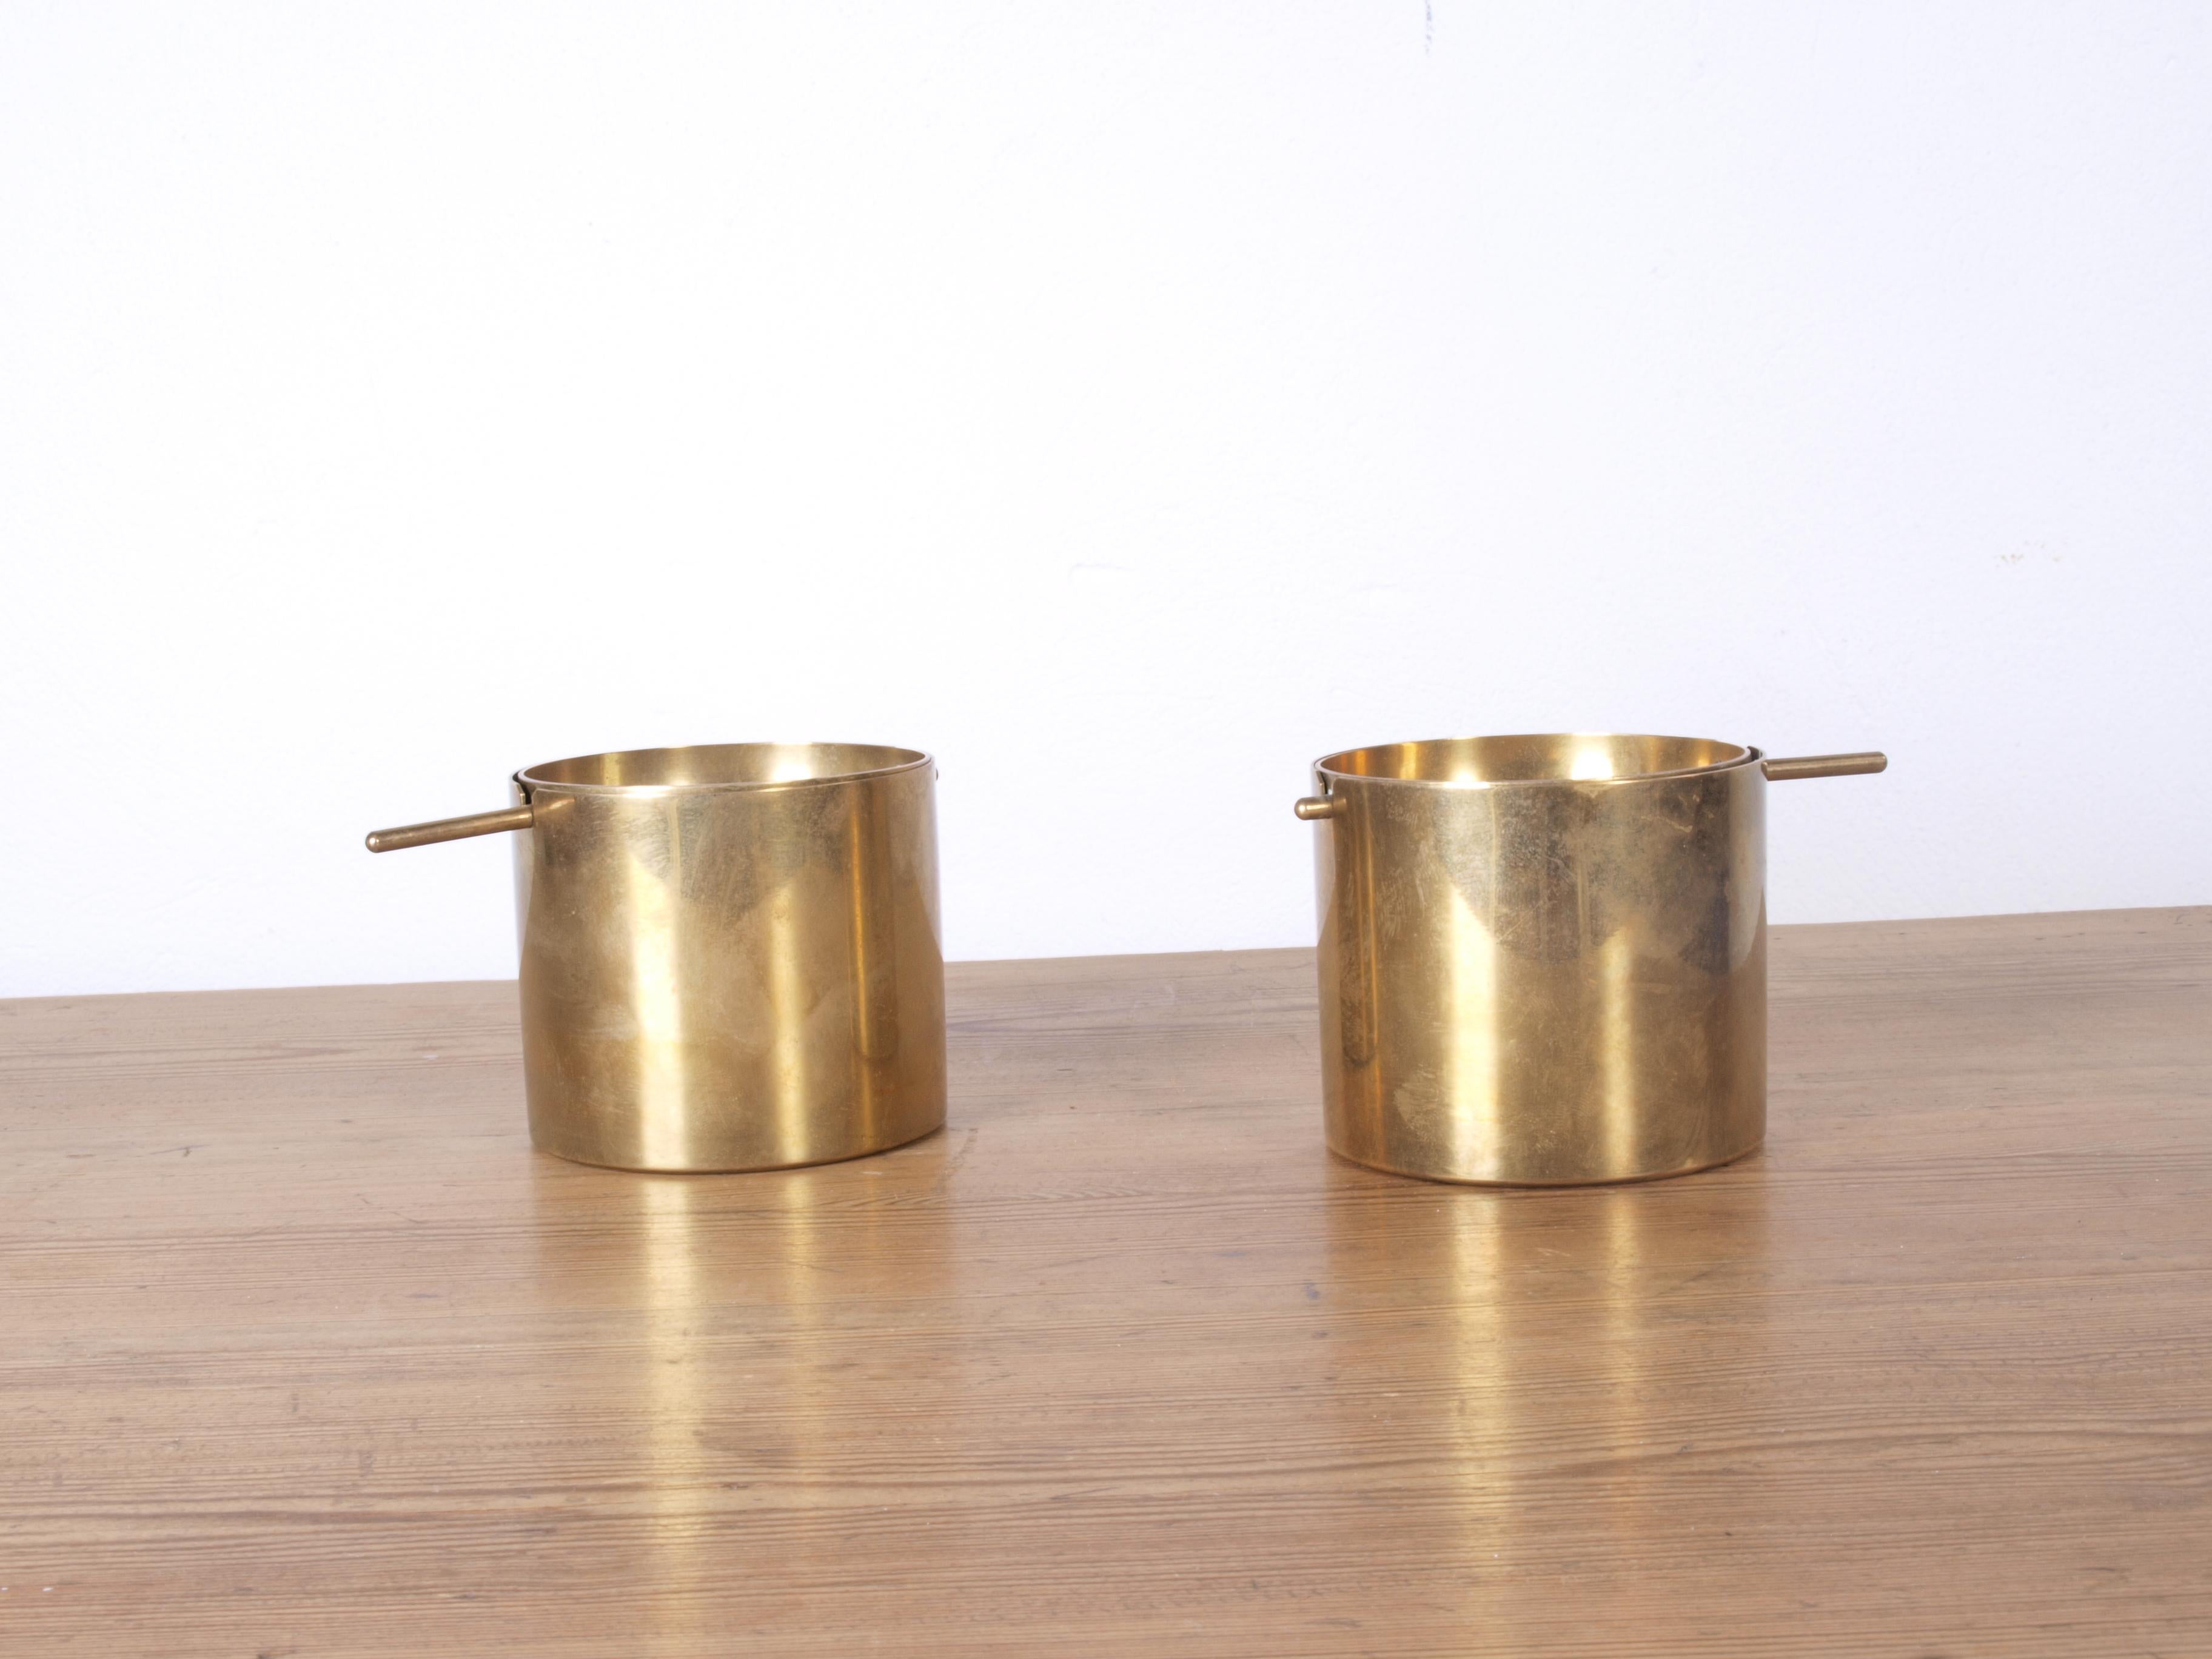 This Cylinda-line ashtray, designed by Arne Jacobsen and made by Stelton between 1967, represents the rare small-sized version meant for cigarretes. The version in brass came on later, when the machine had difficulties working with the new material.